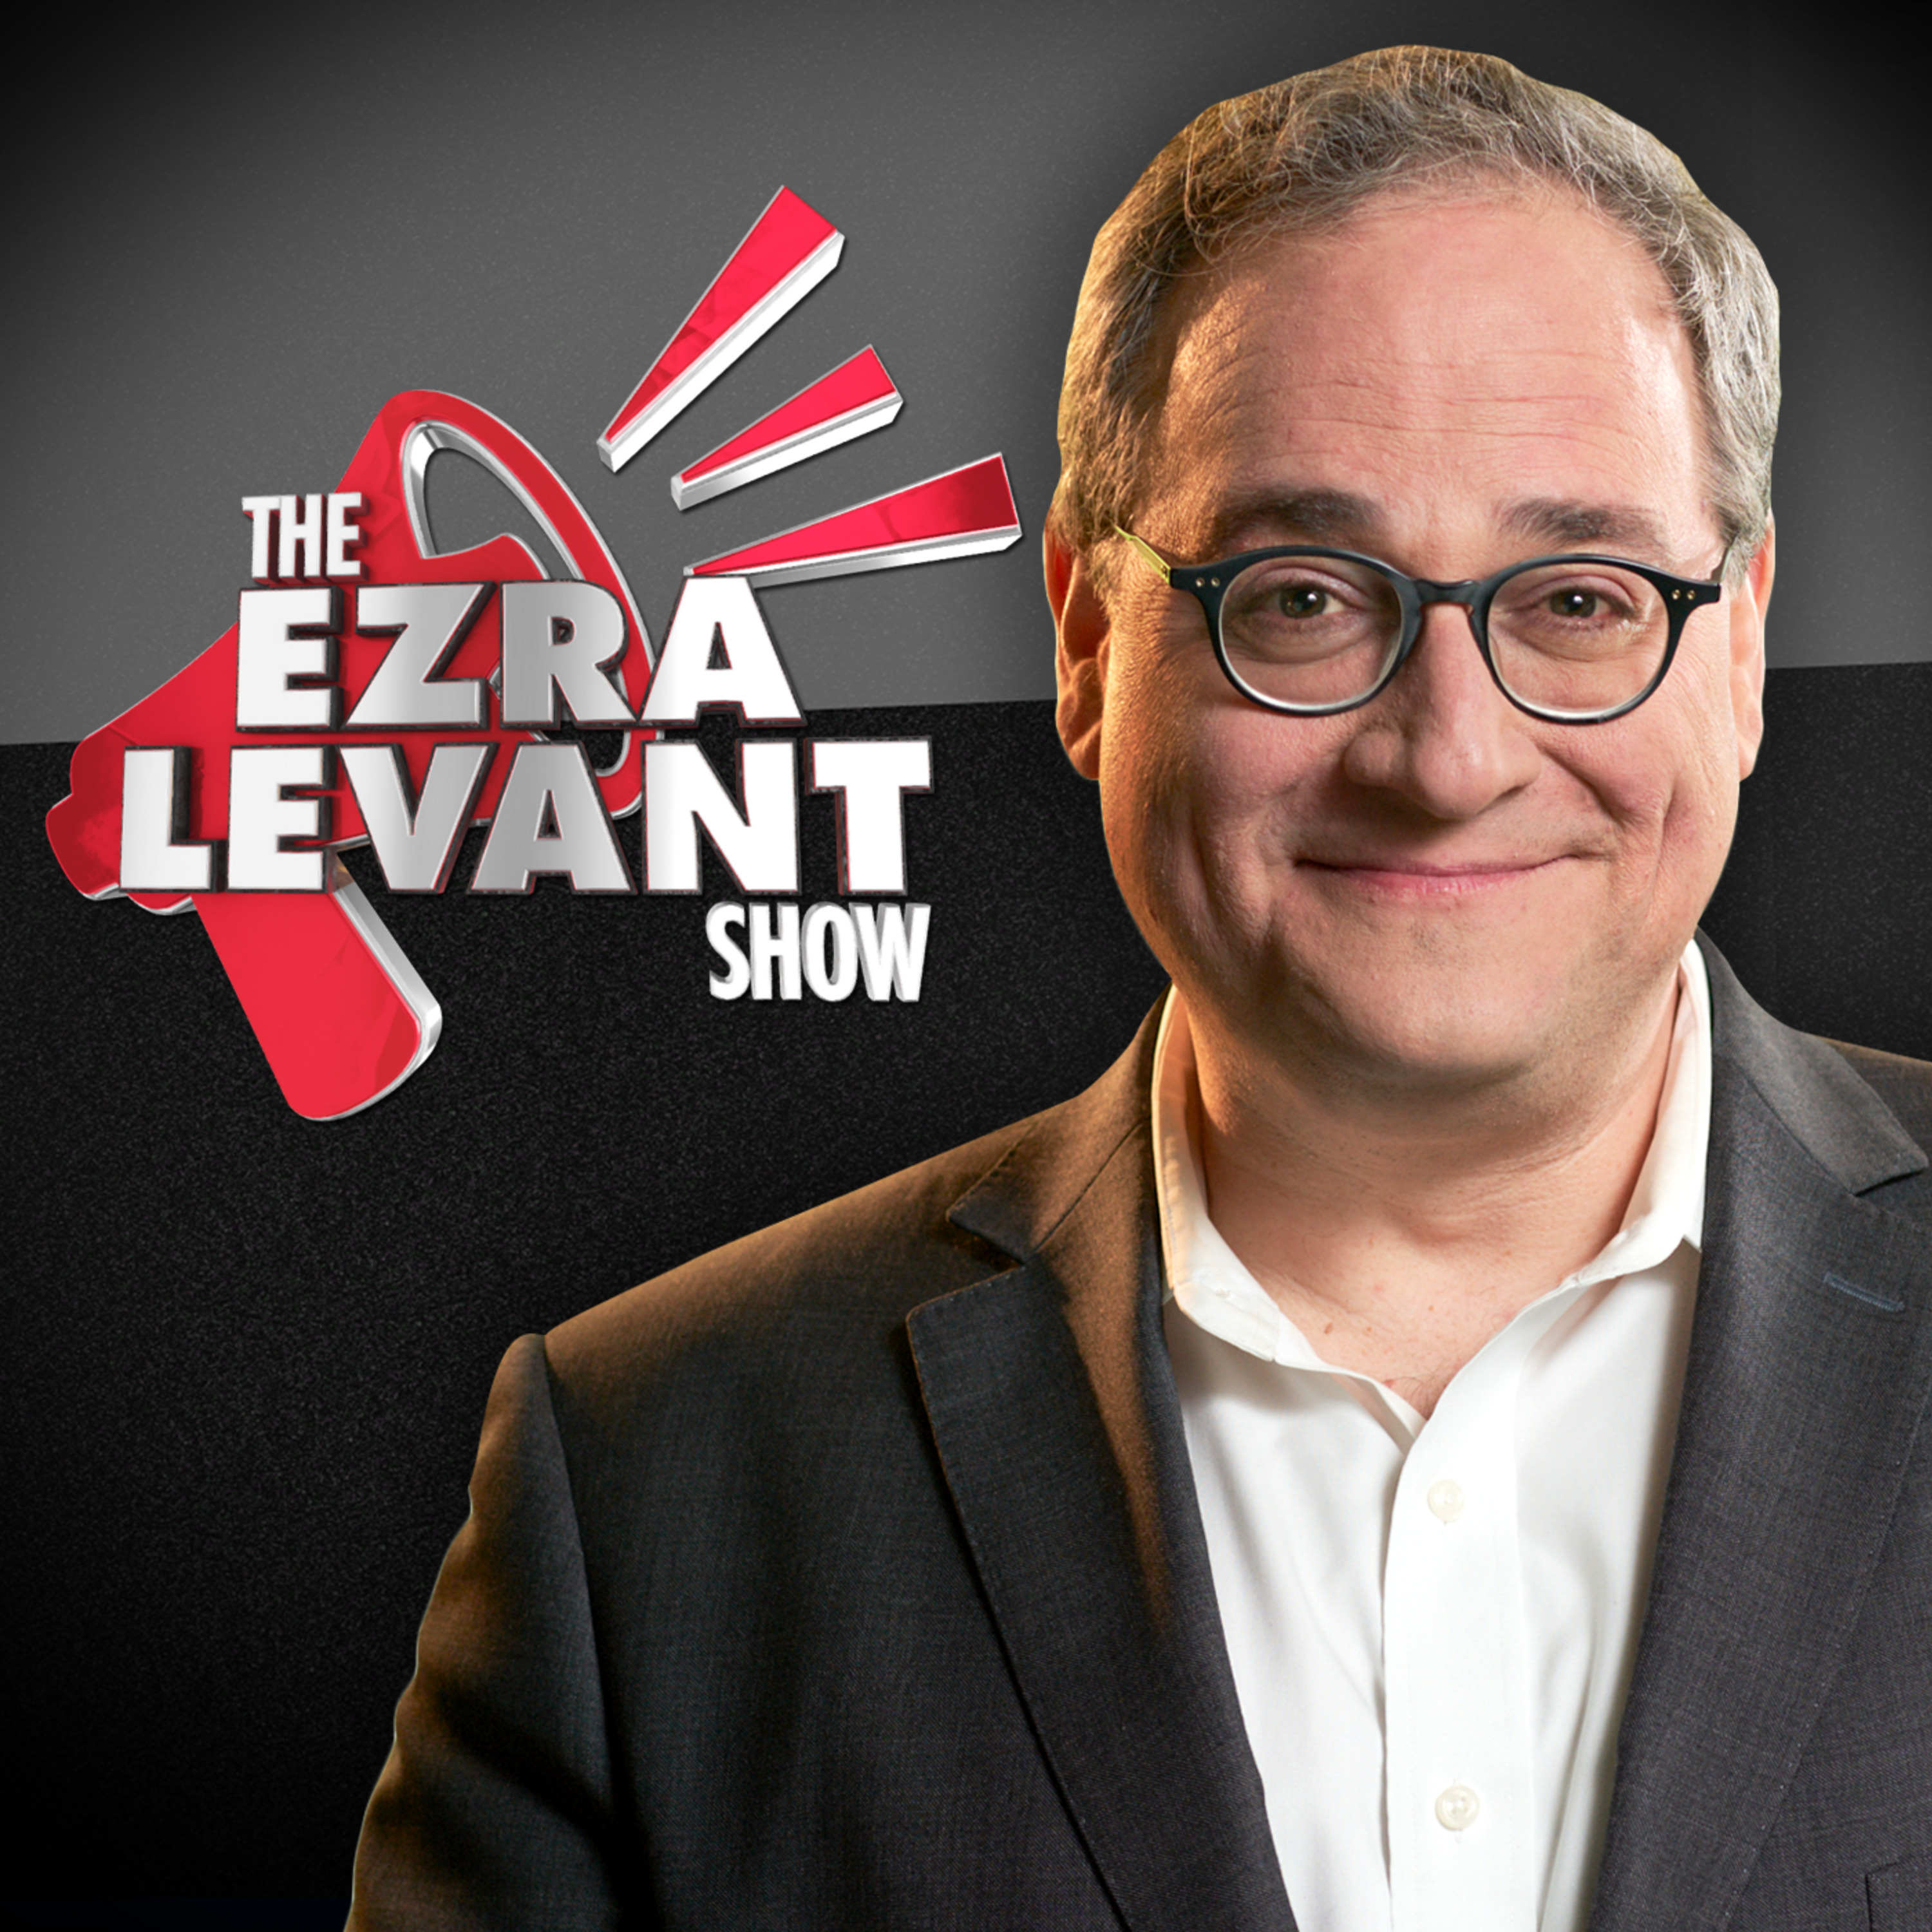 EZRA LEVANT | Canadian conservatives are finding their voice again